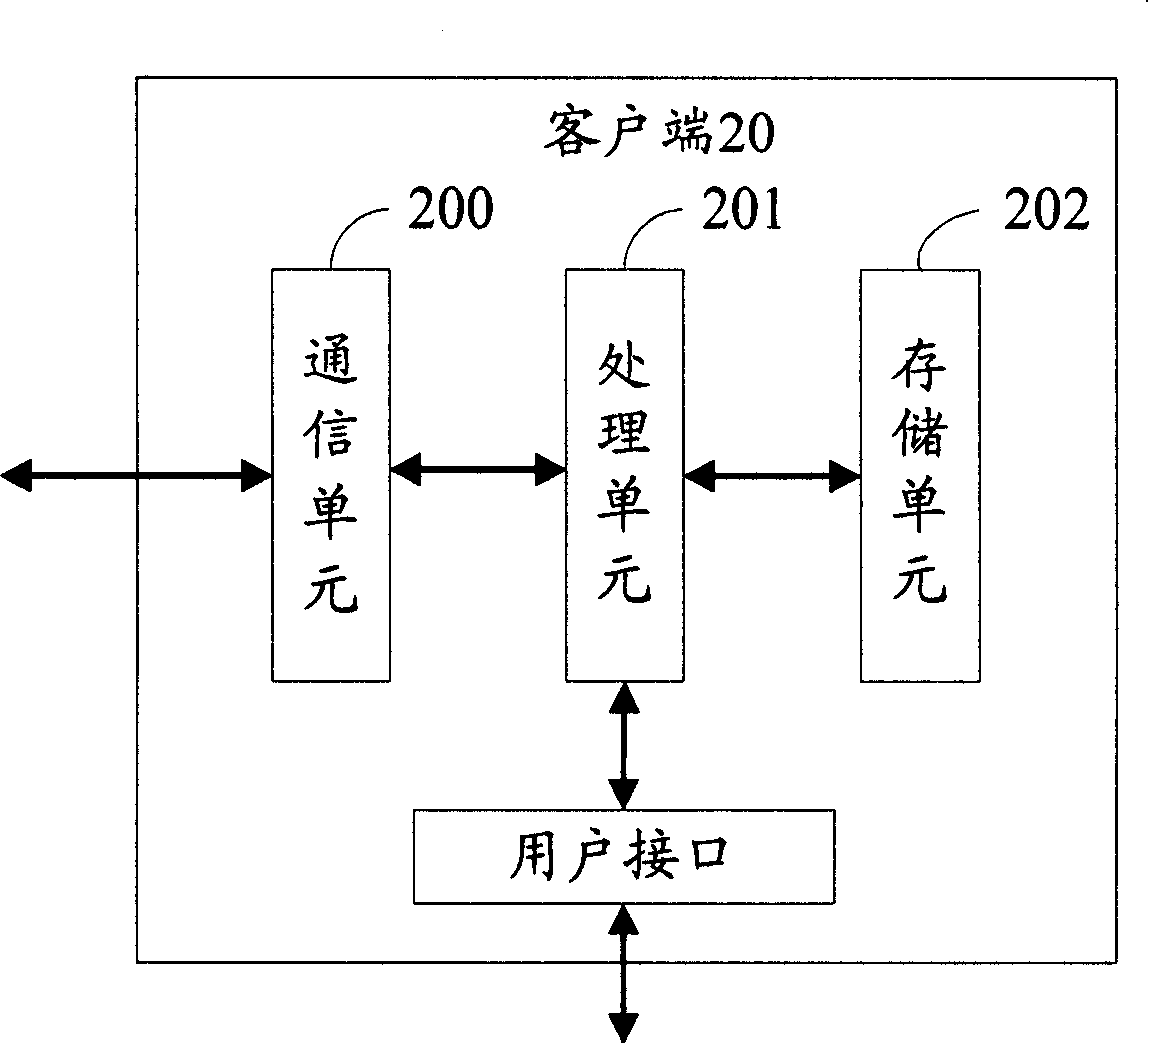 Method and system of self-defining cluster label